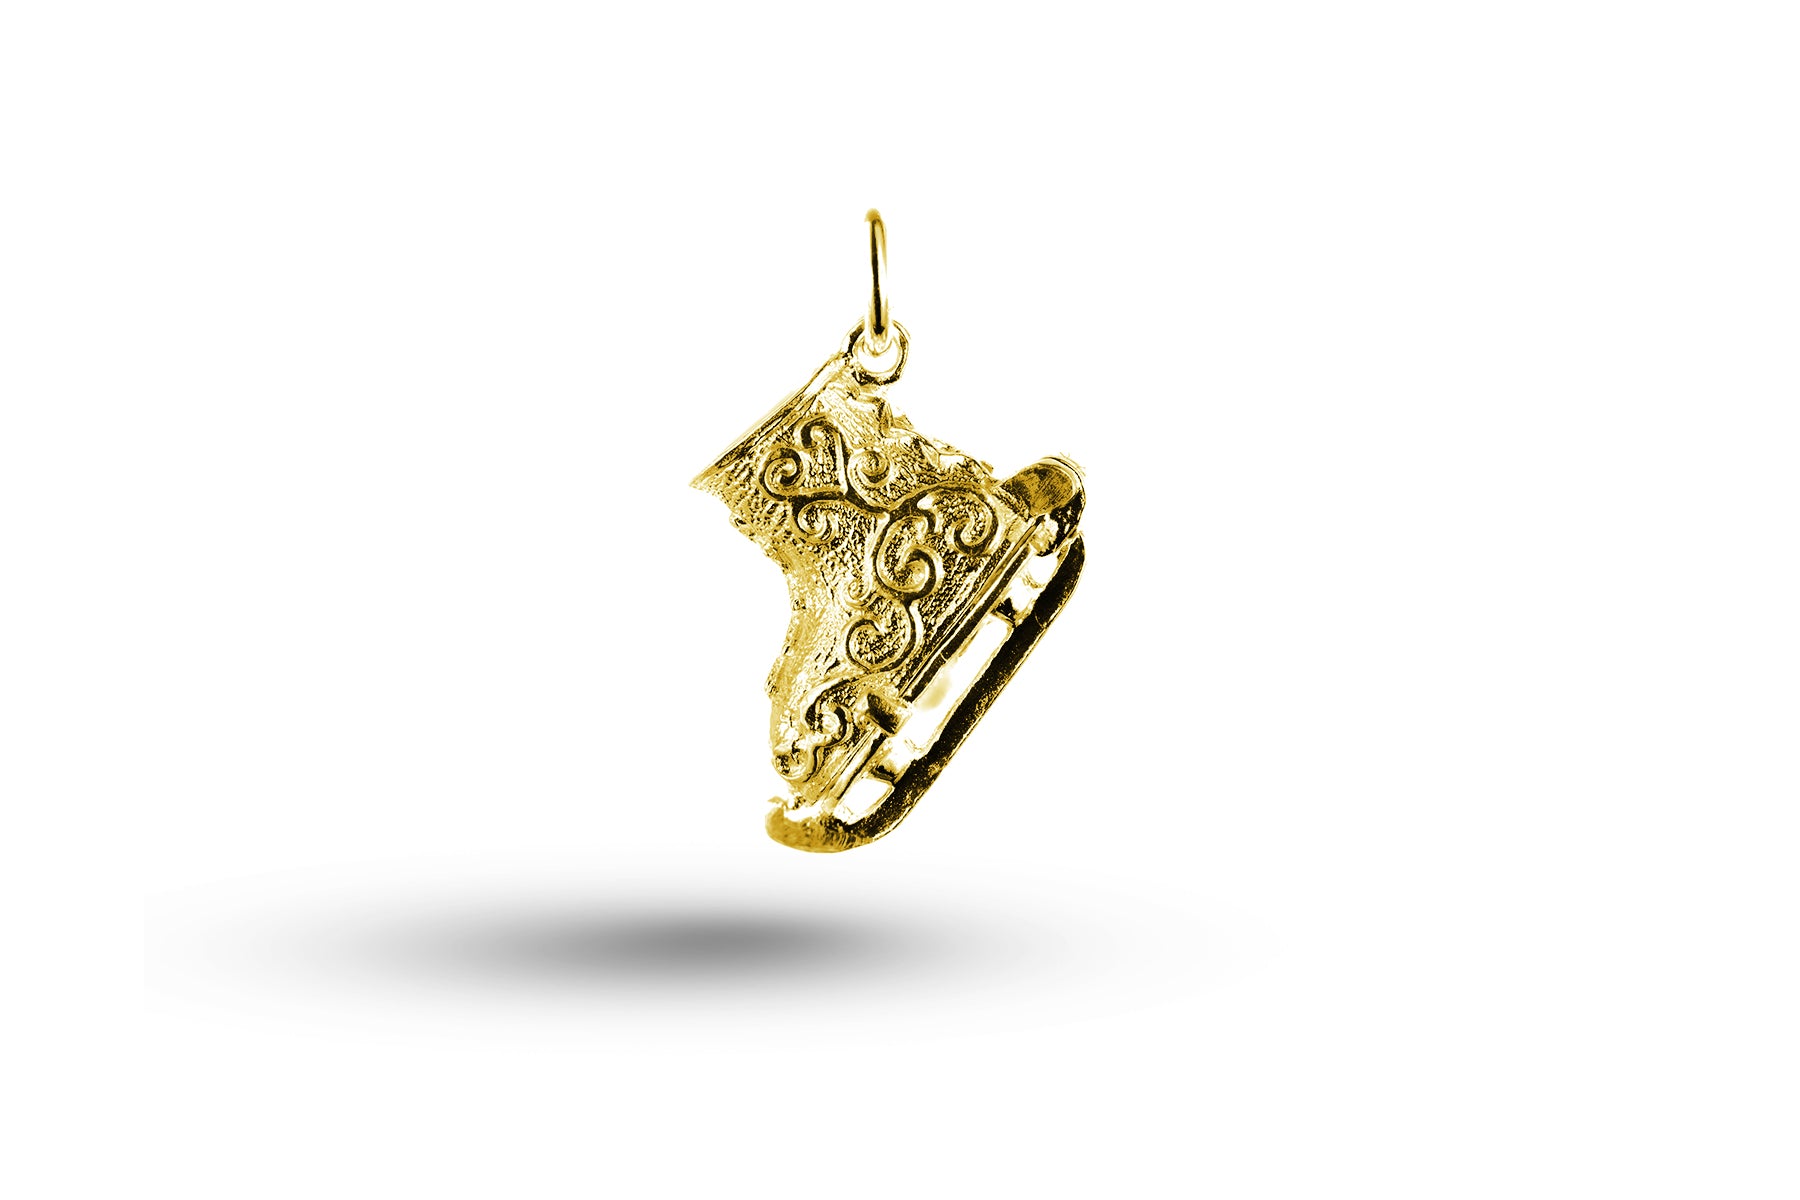 Yellow gold Opening Ice Skate charm.